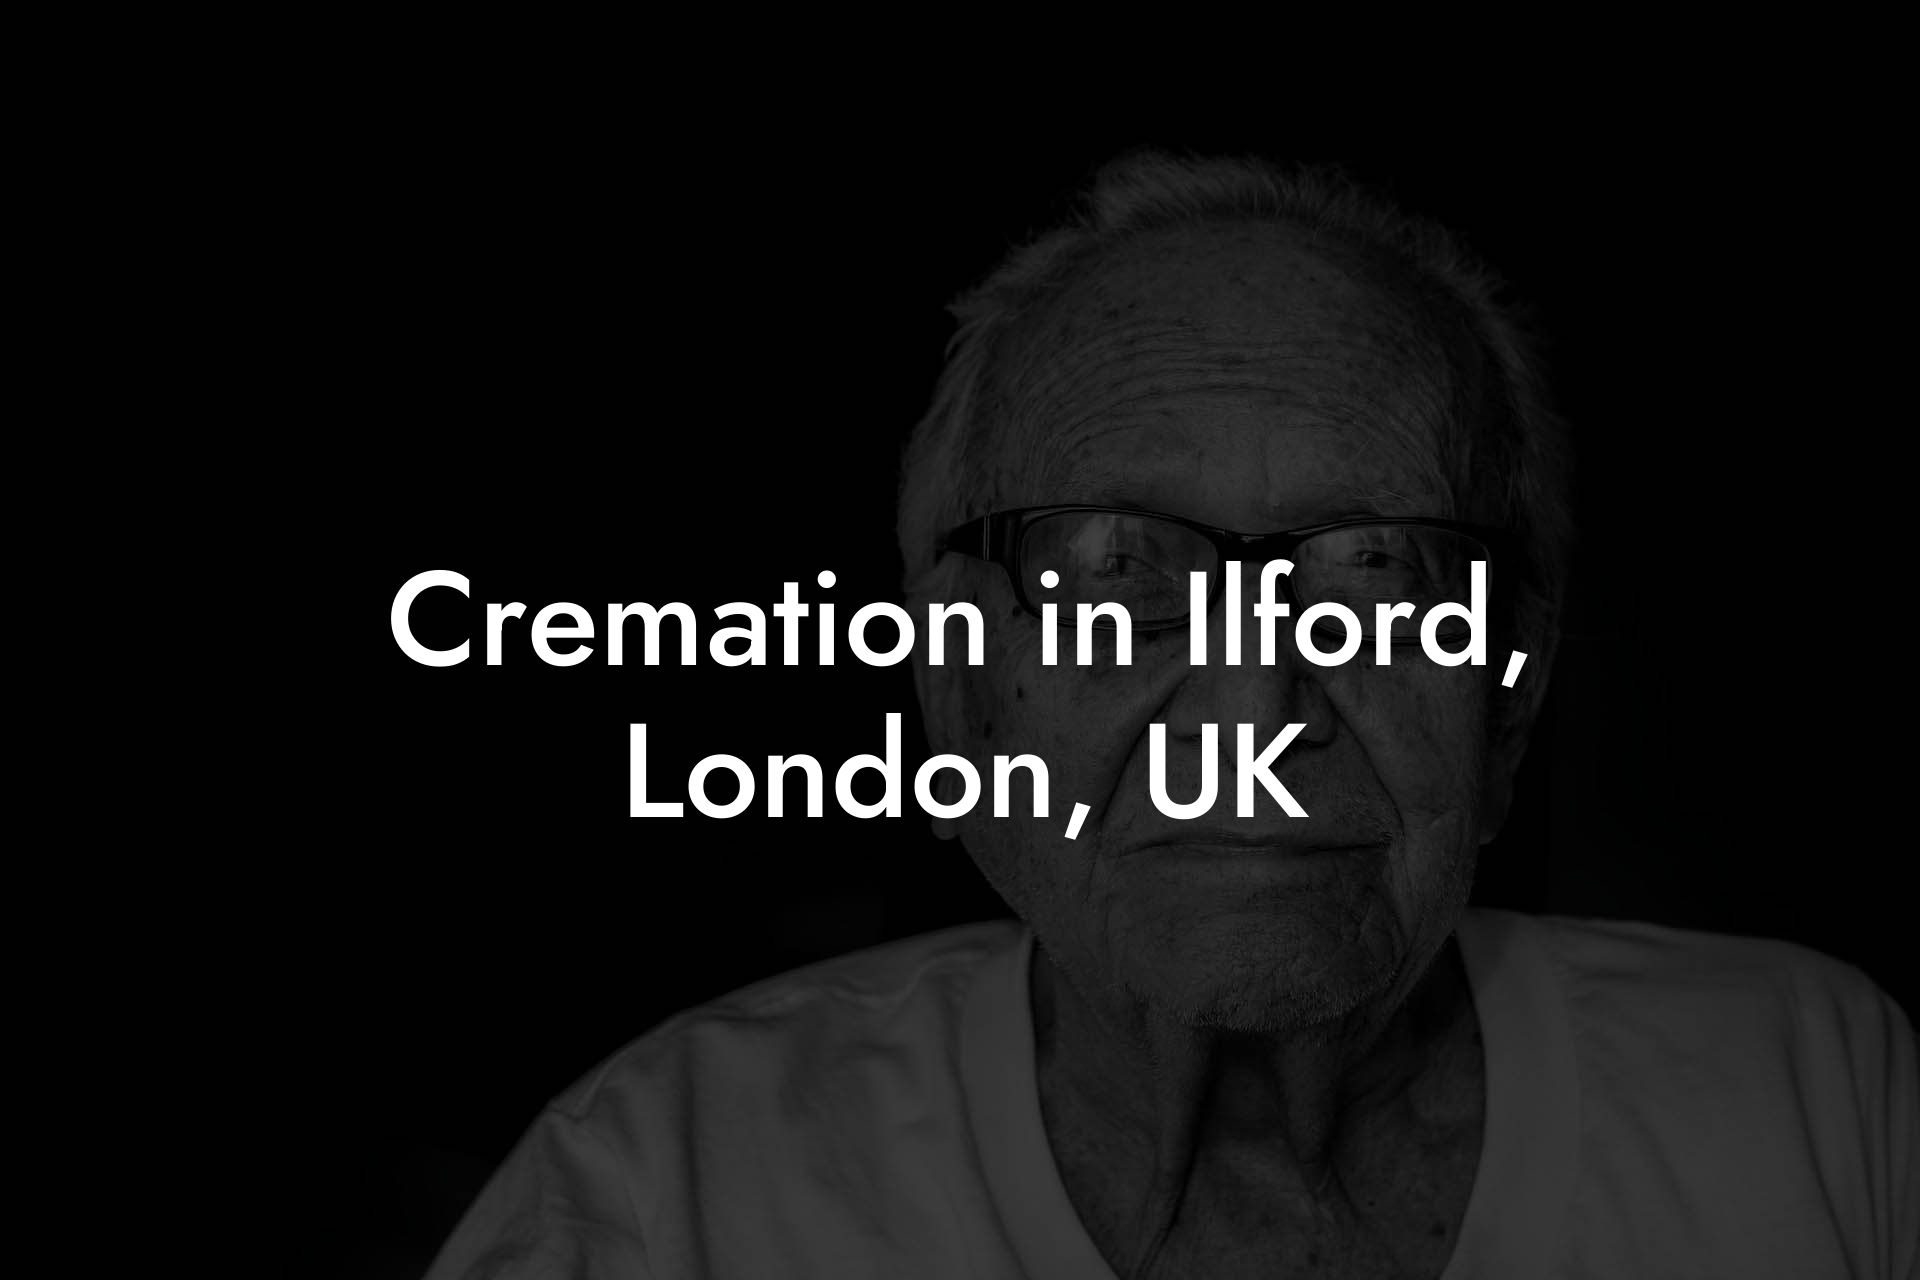 Cremation in Ilford, London, UK